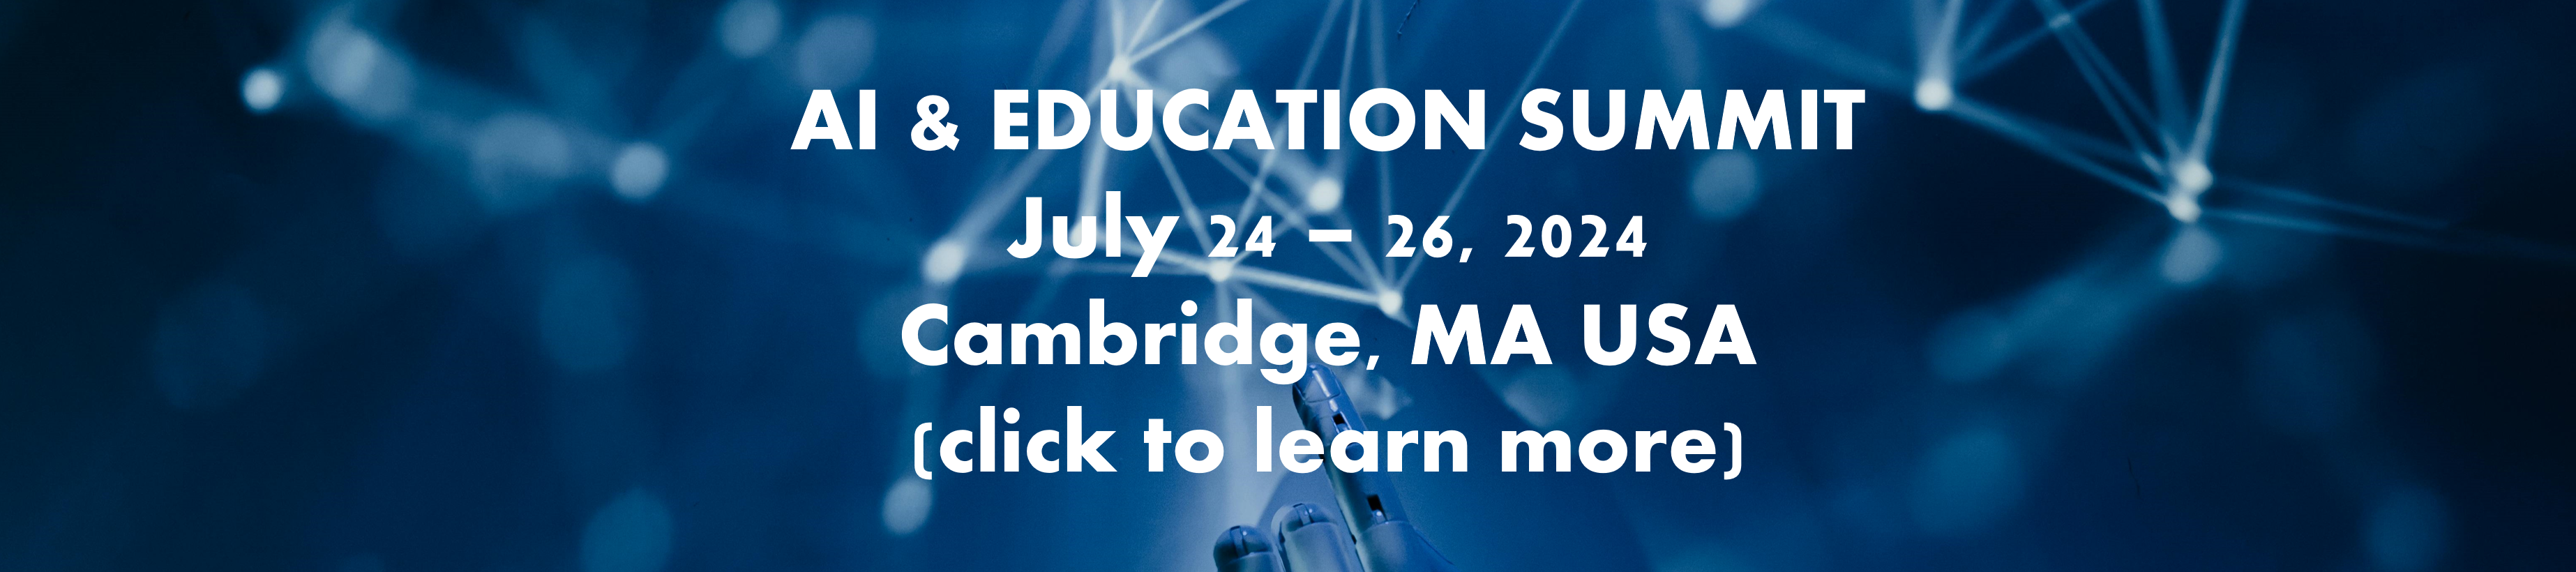 Banner promoting AI & Education Summit July 24-26.